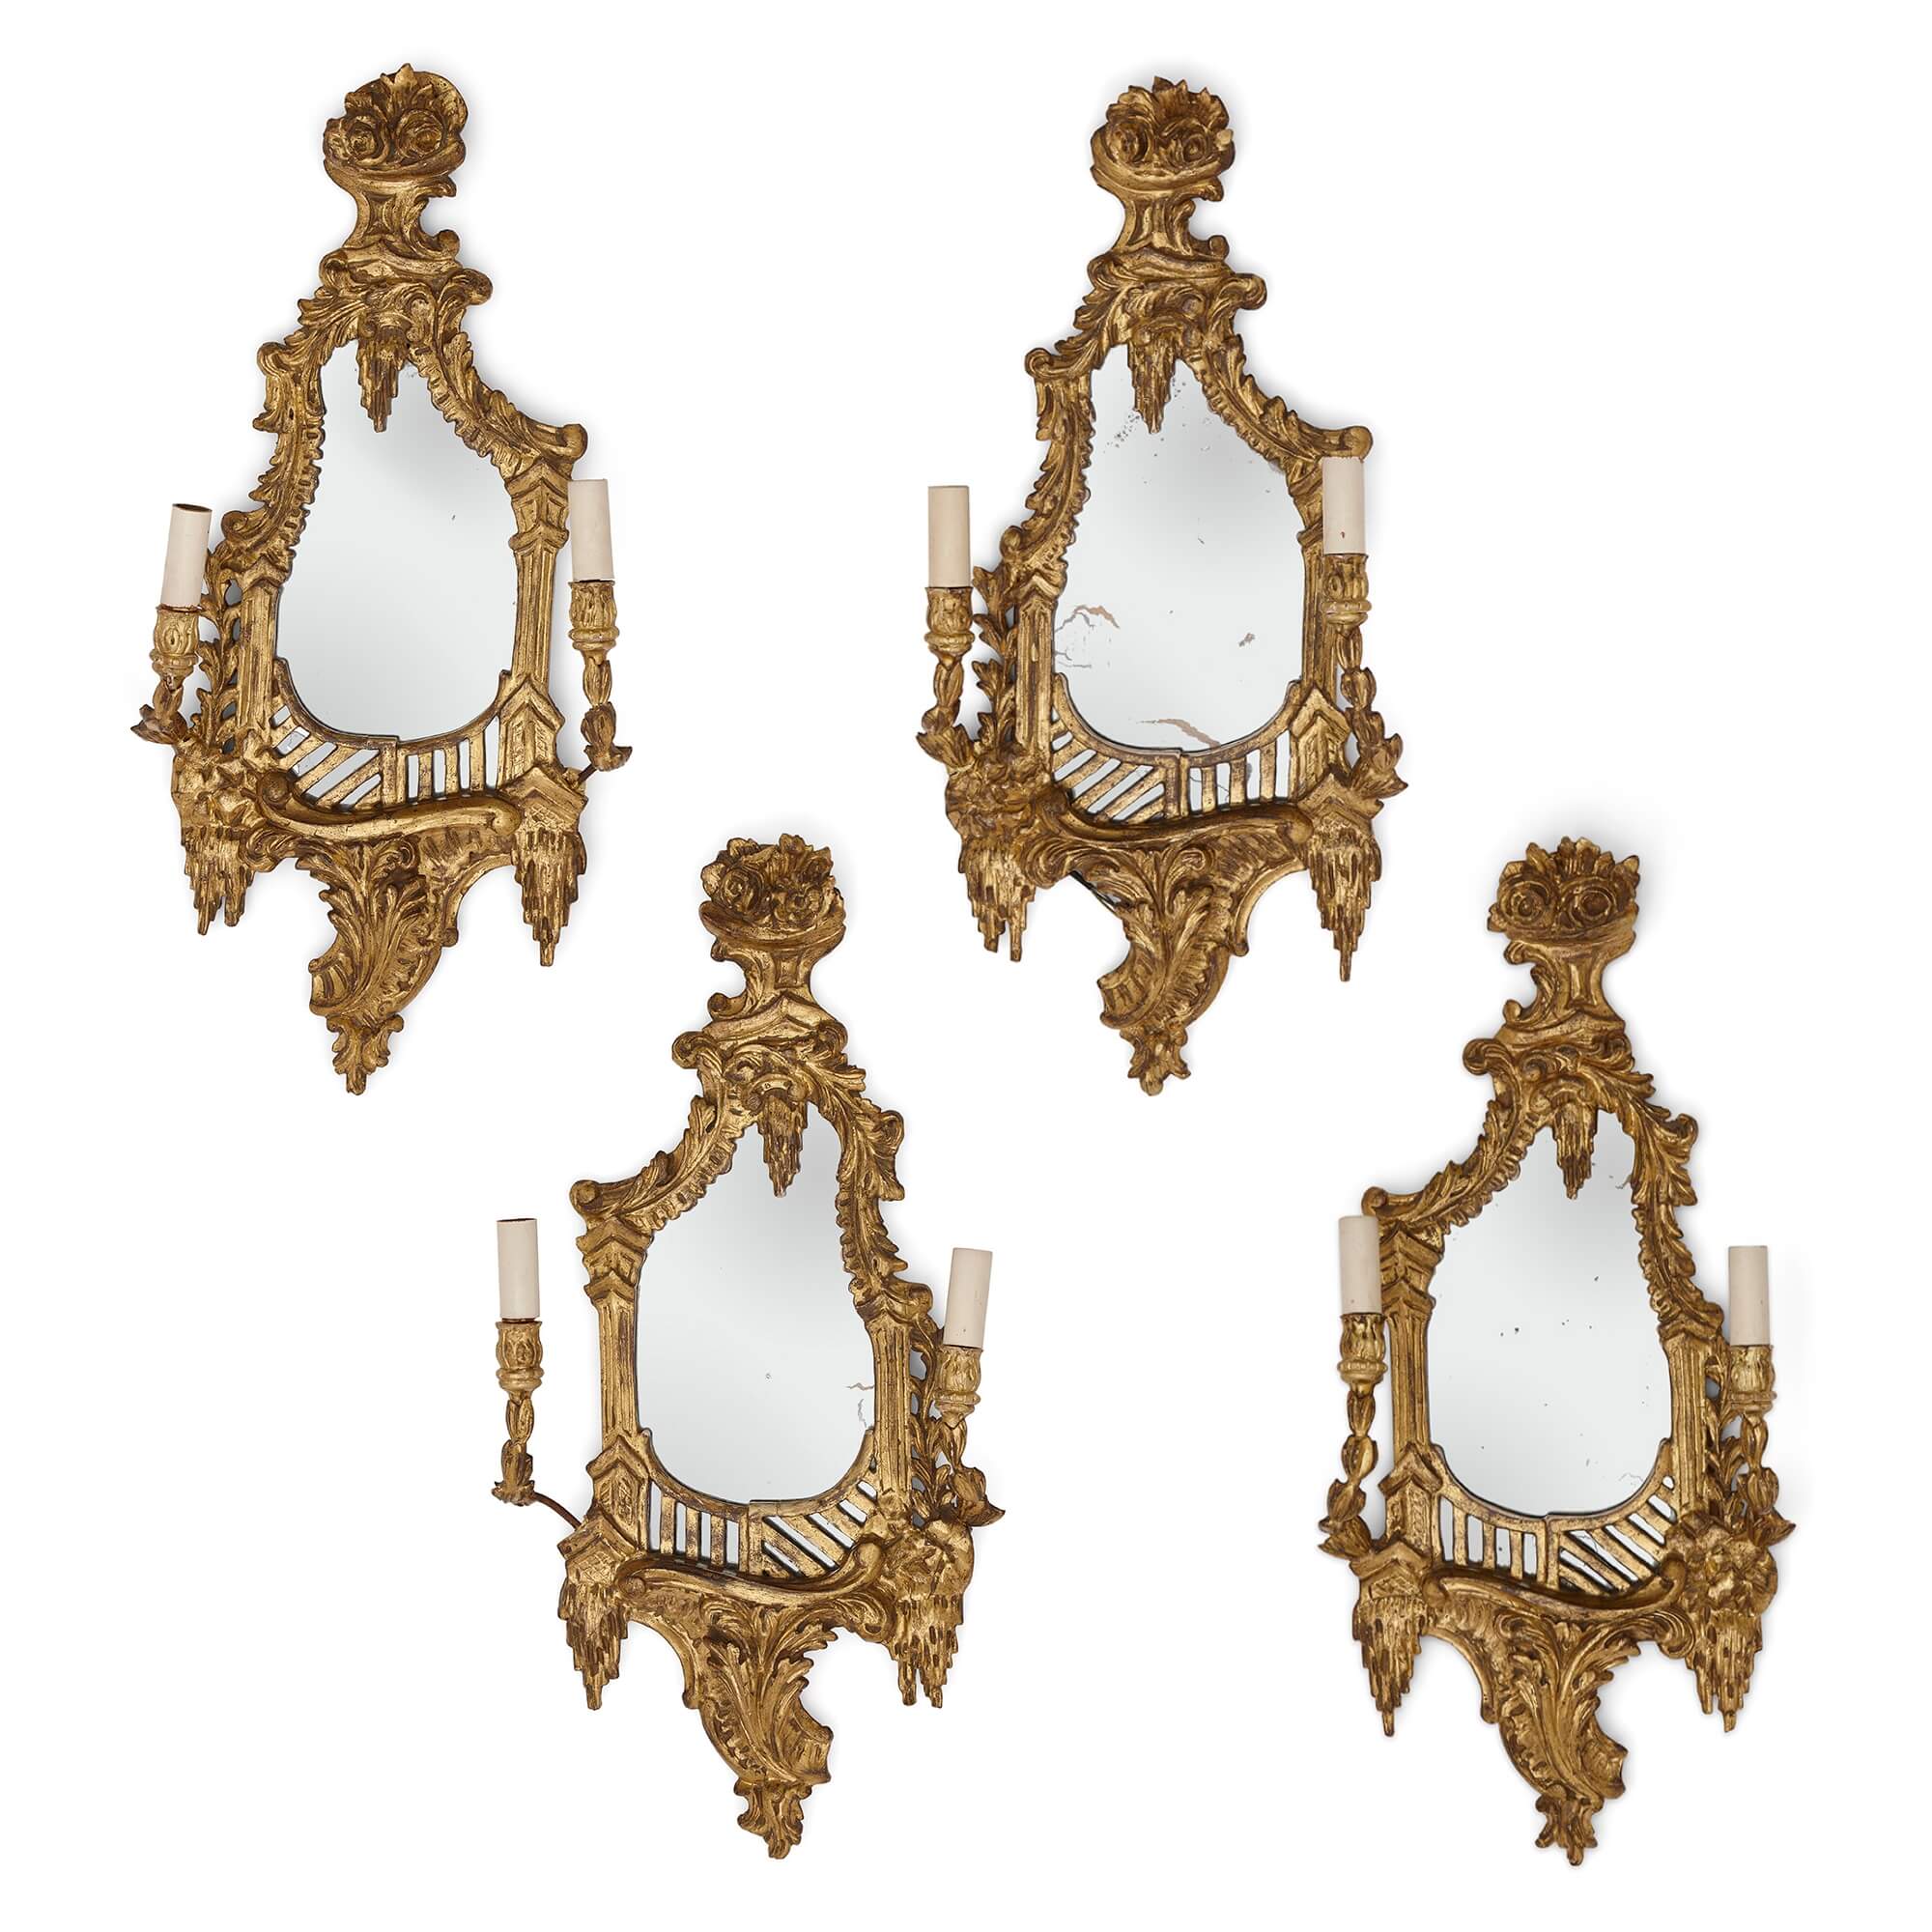 Four Antique French Girandoles in the Rococo-Style   For Sale